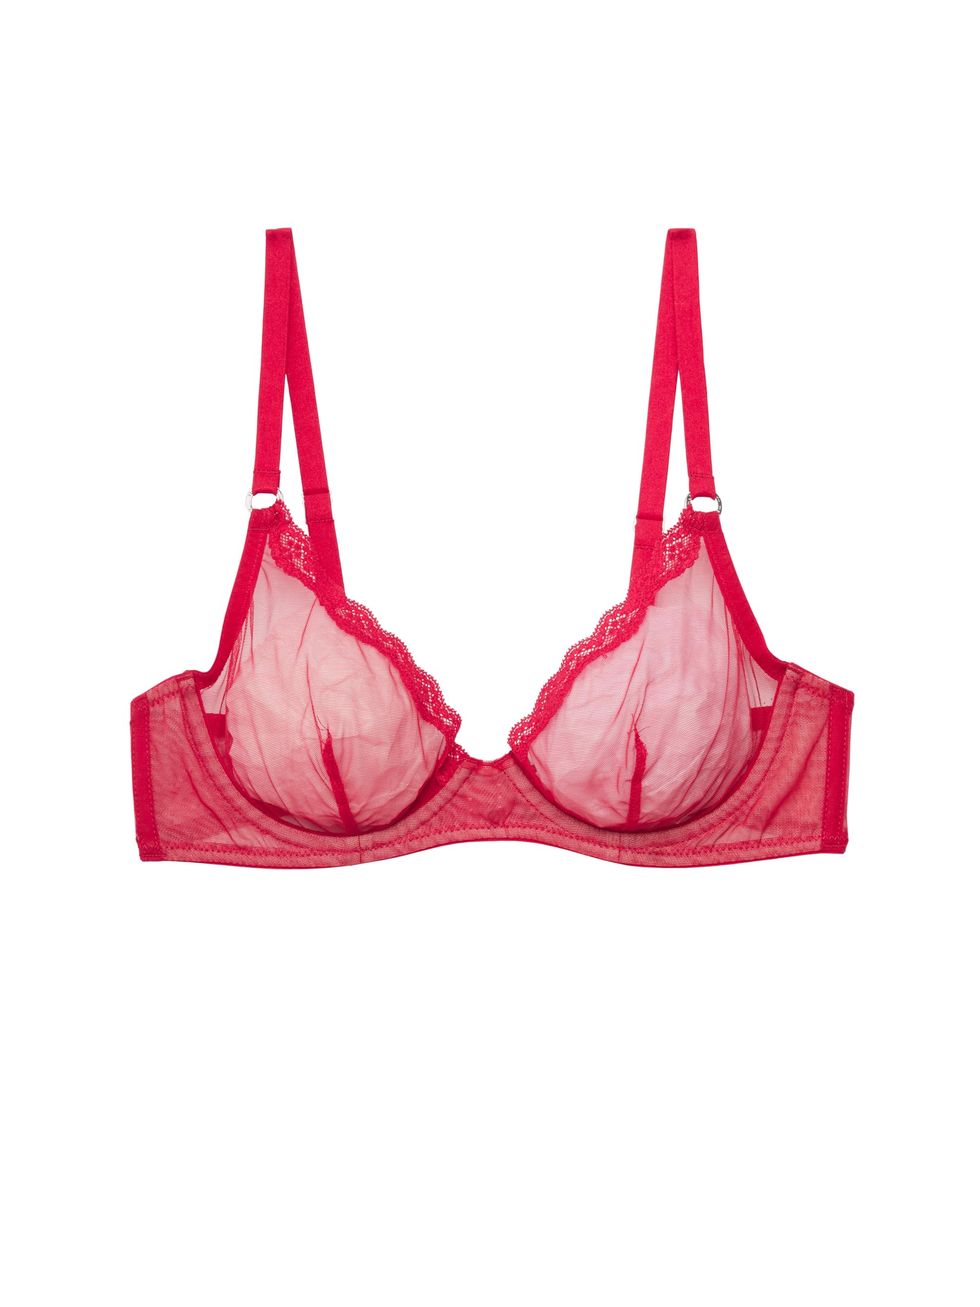 Valentine's Day Lingerie for Your Love — or Simply Yourself